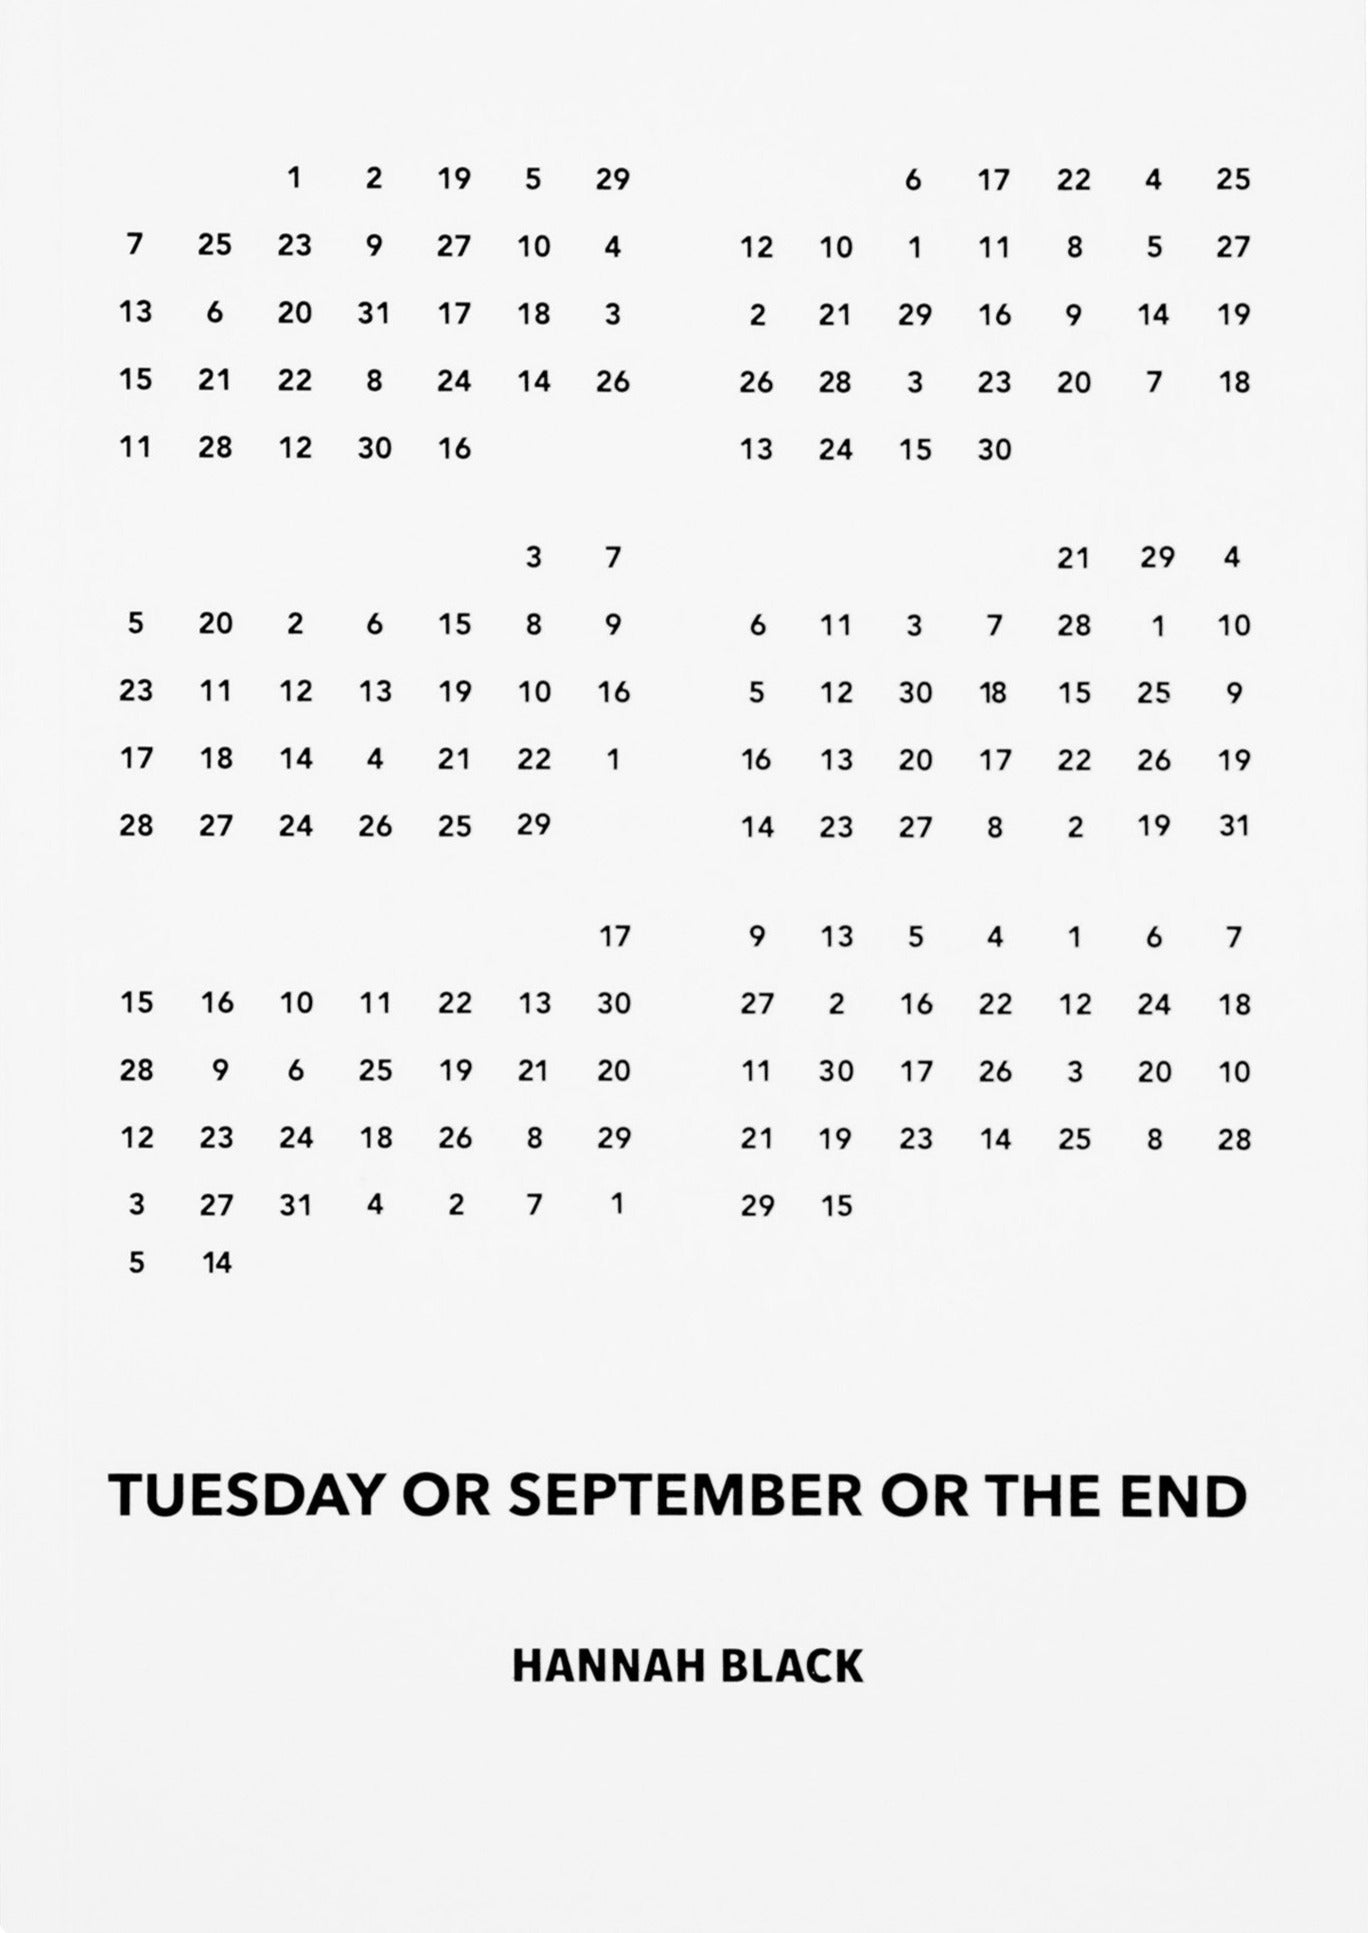 Tuesday or September or The End